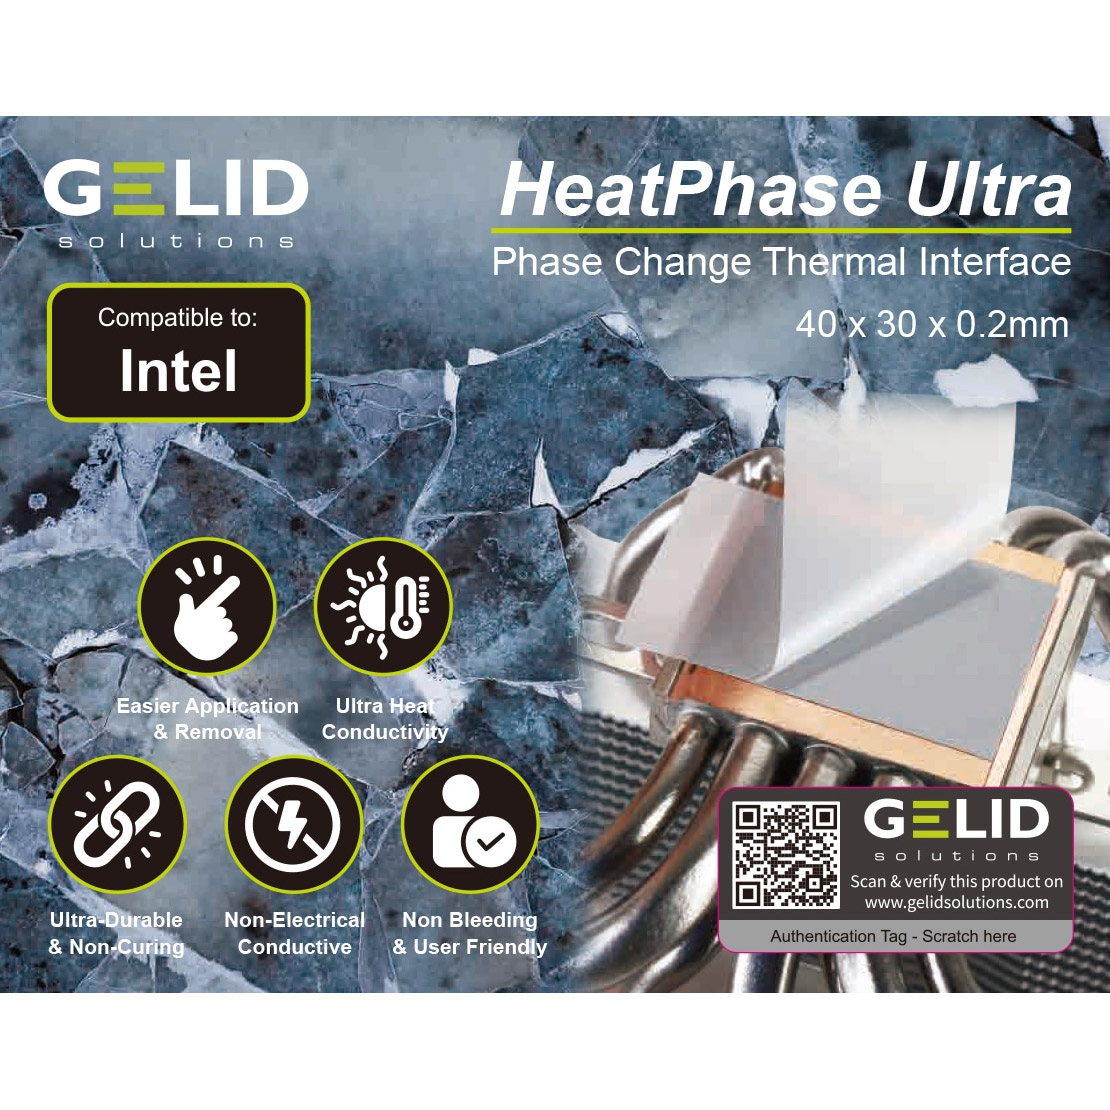 HeatPhase Ultra - Gelid Solutions